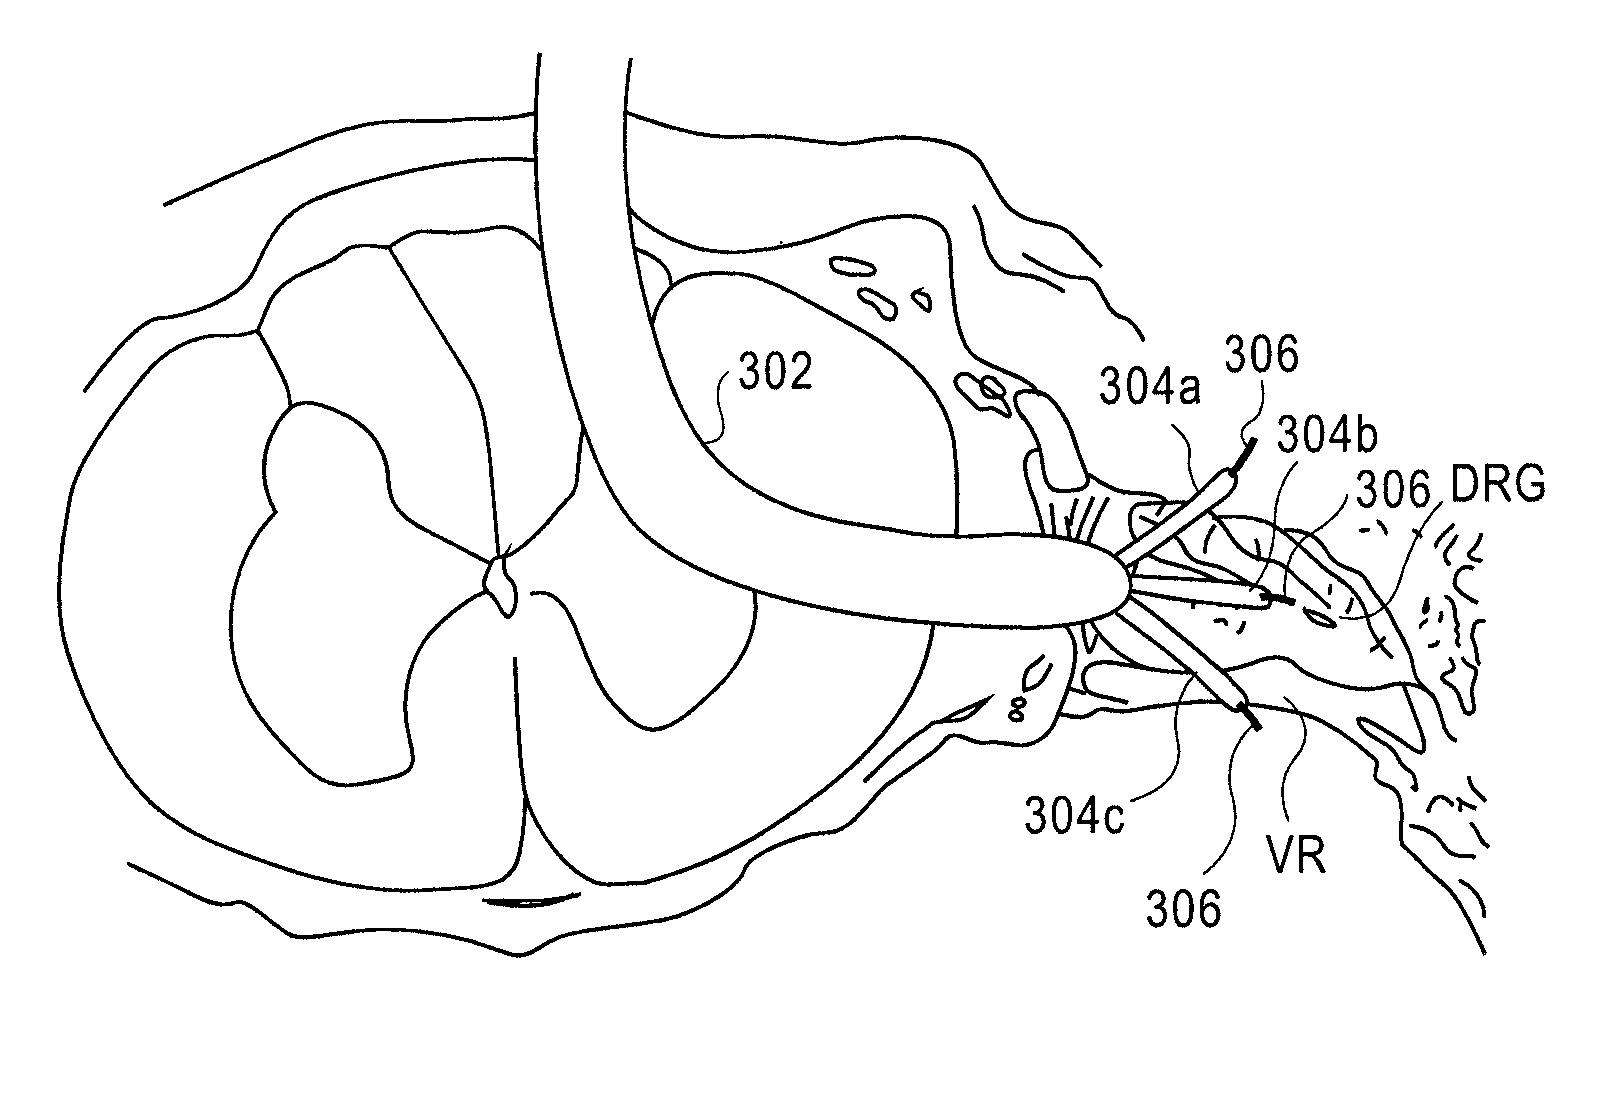 Expandable stimulation leads and methods of use